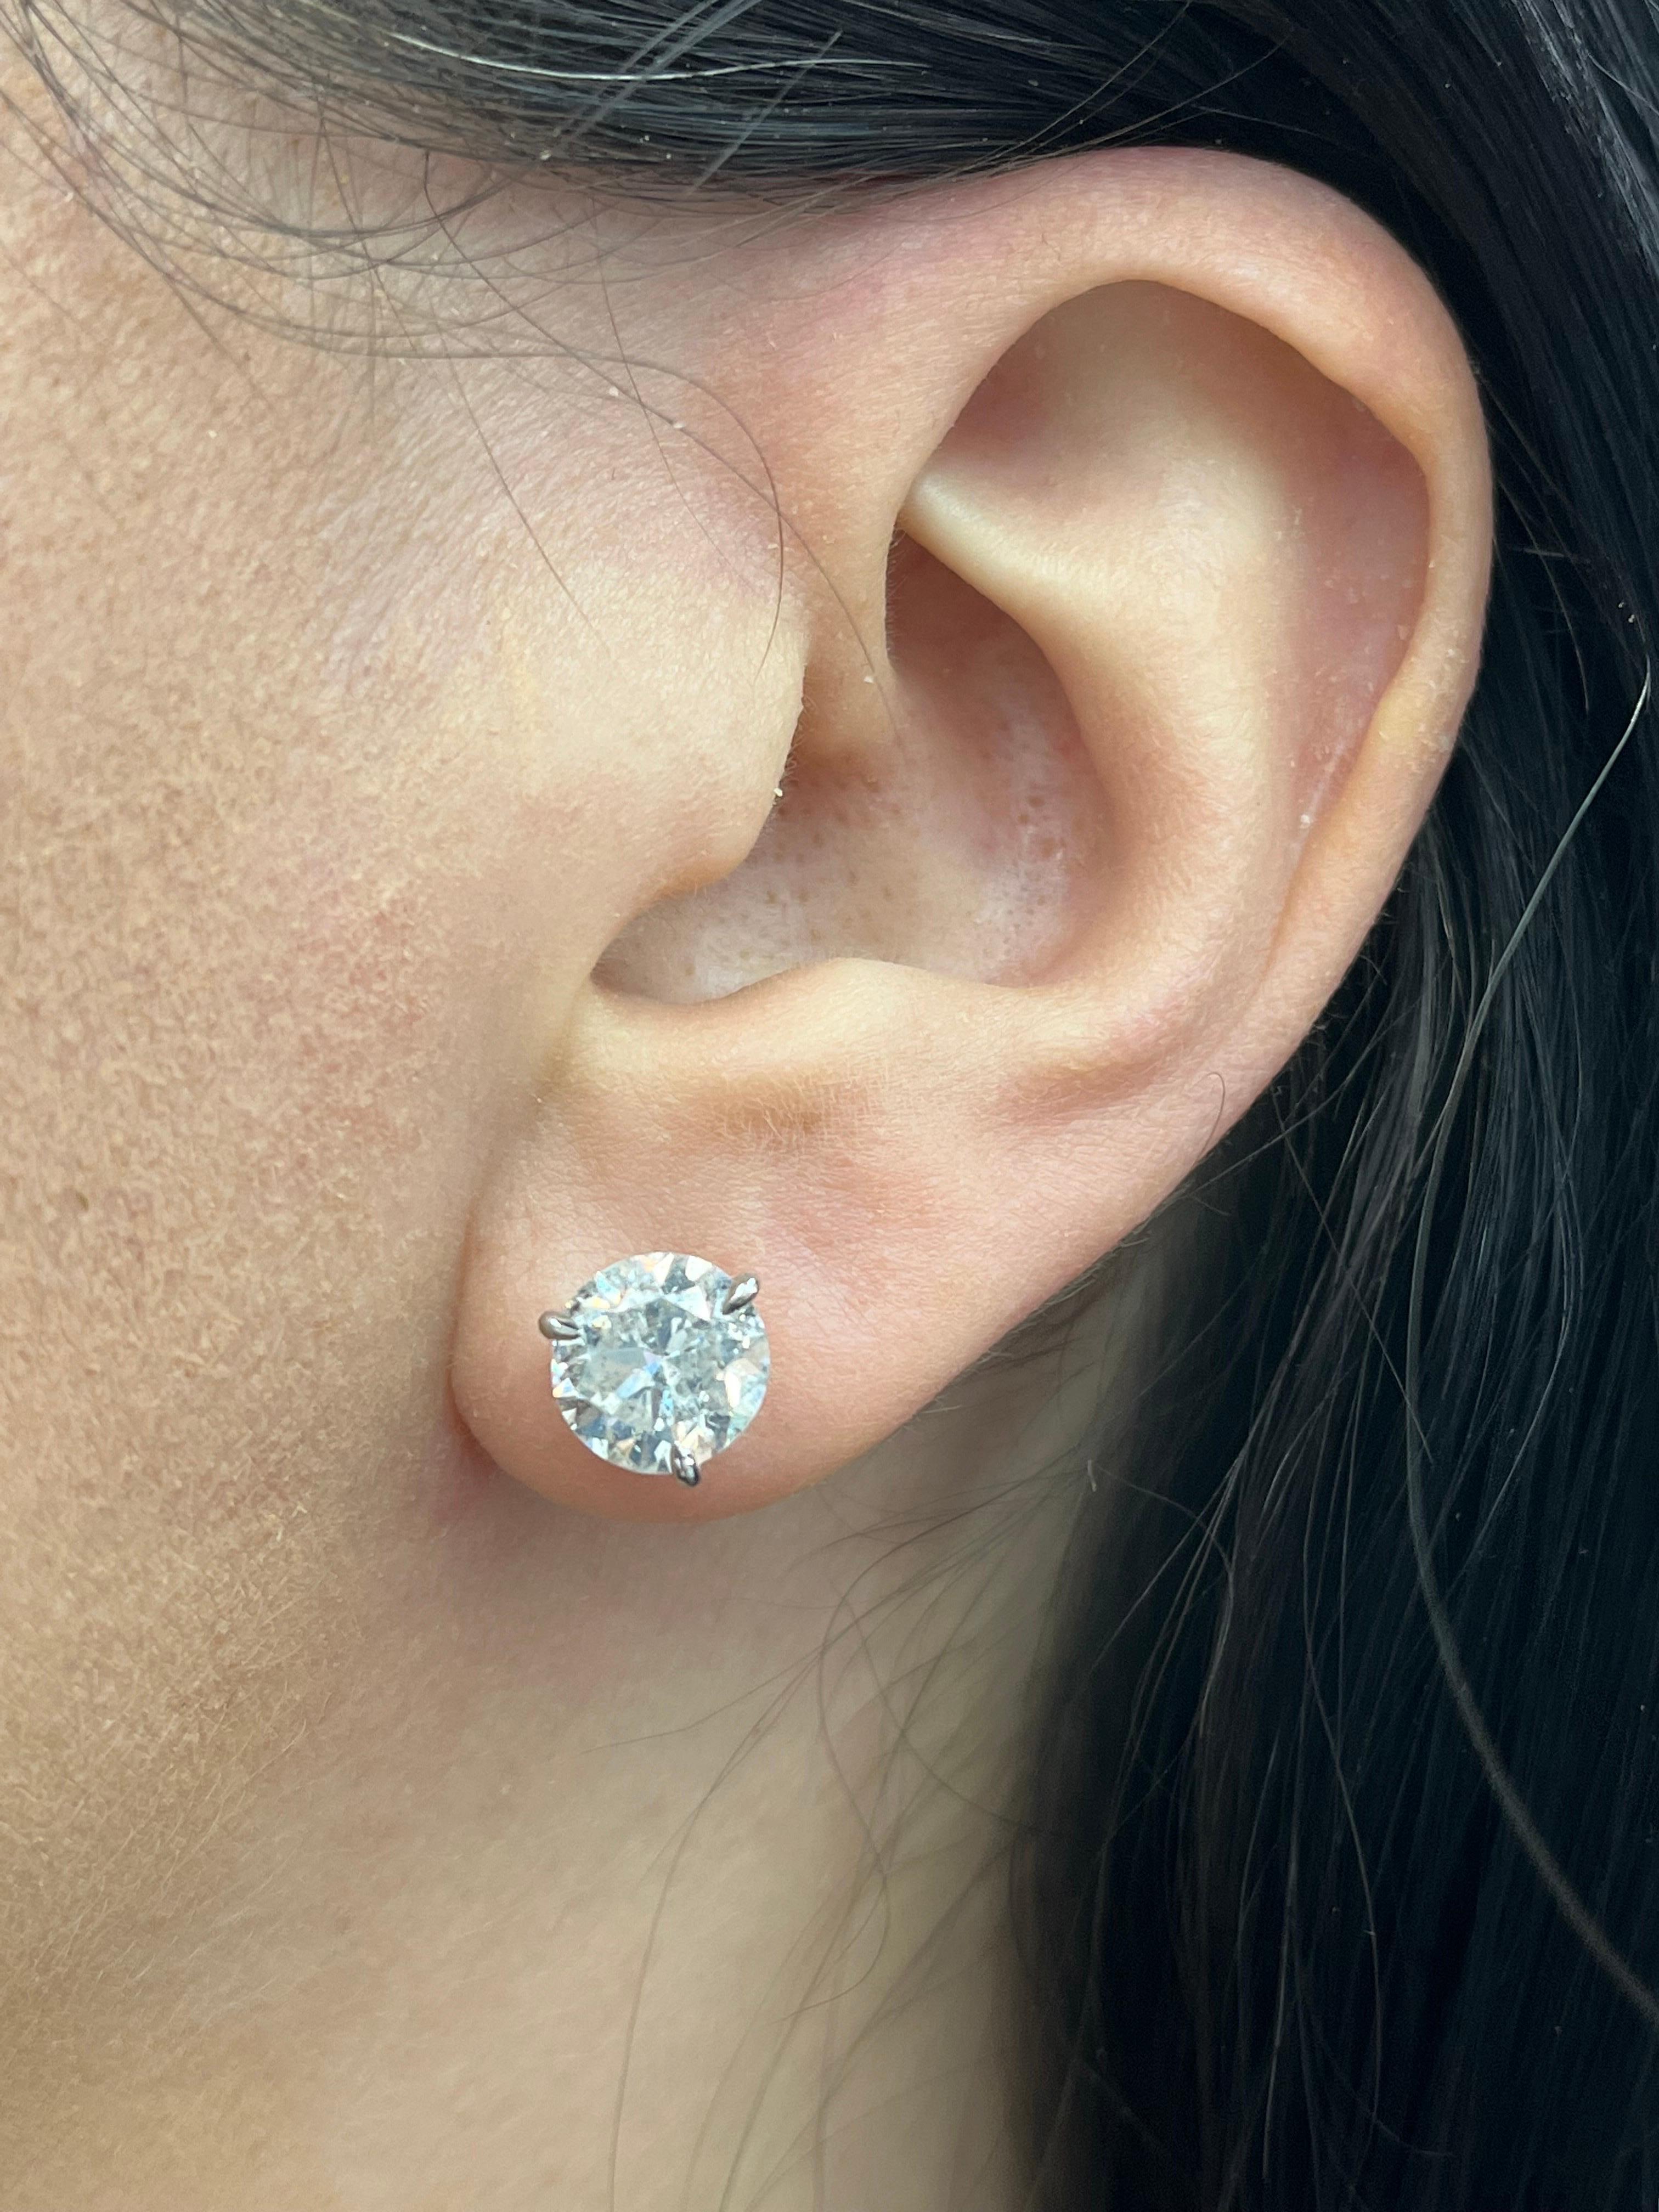 Diamond stud earrings weighing 4.66 Carats Color G-H Clarity I1 in a 3 prong Champagne setting.
Eye Cleanish & 7/10 Life

Setting can be changed to a Basket, Martini or Champagne/ 3 or 4 Prong/ 14 or 18 Karat.
DM for more Info & Videos on my